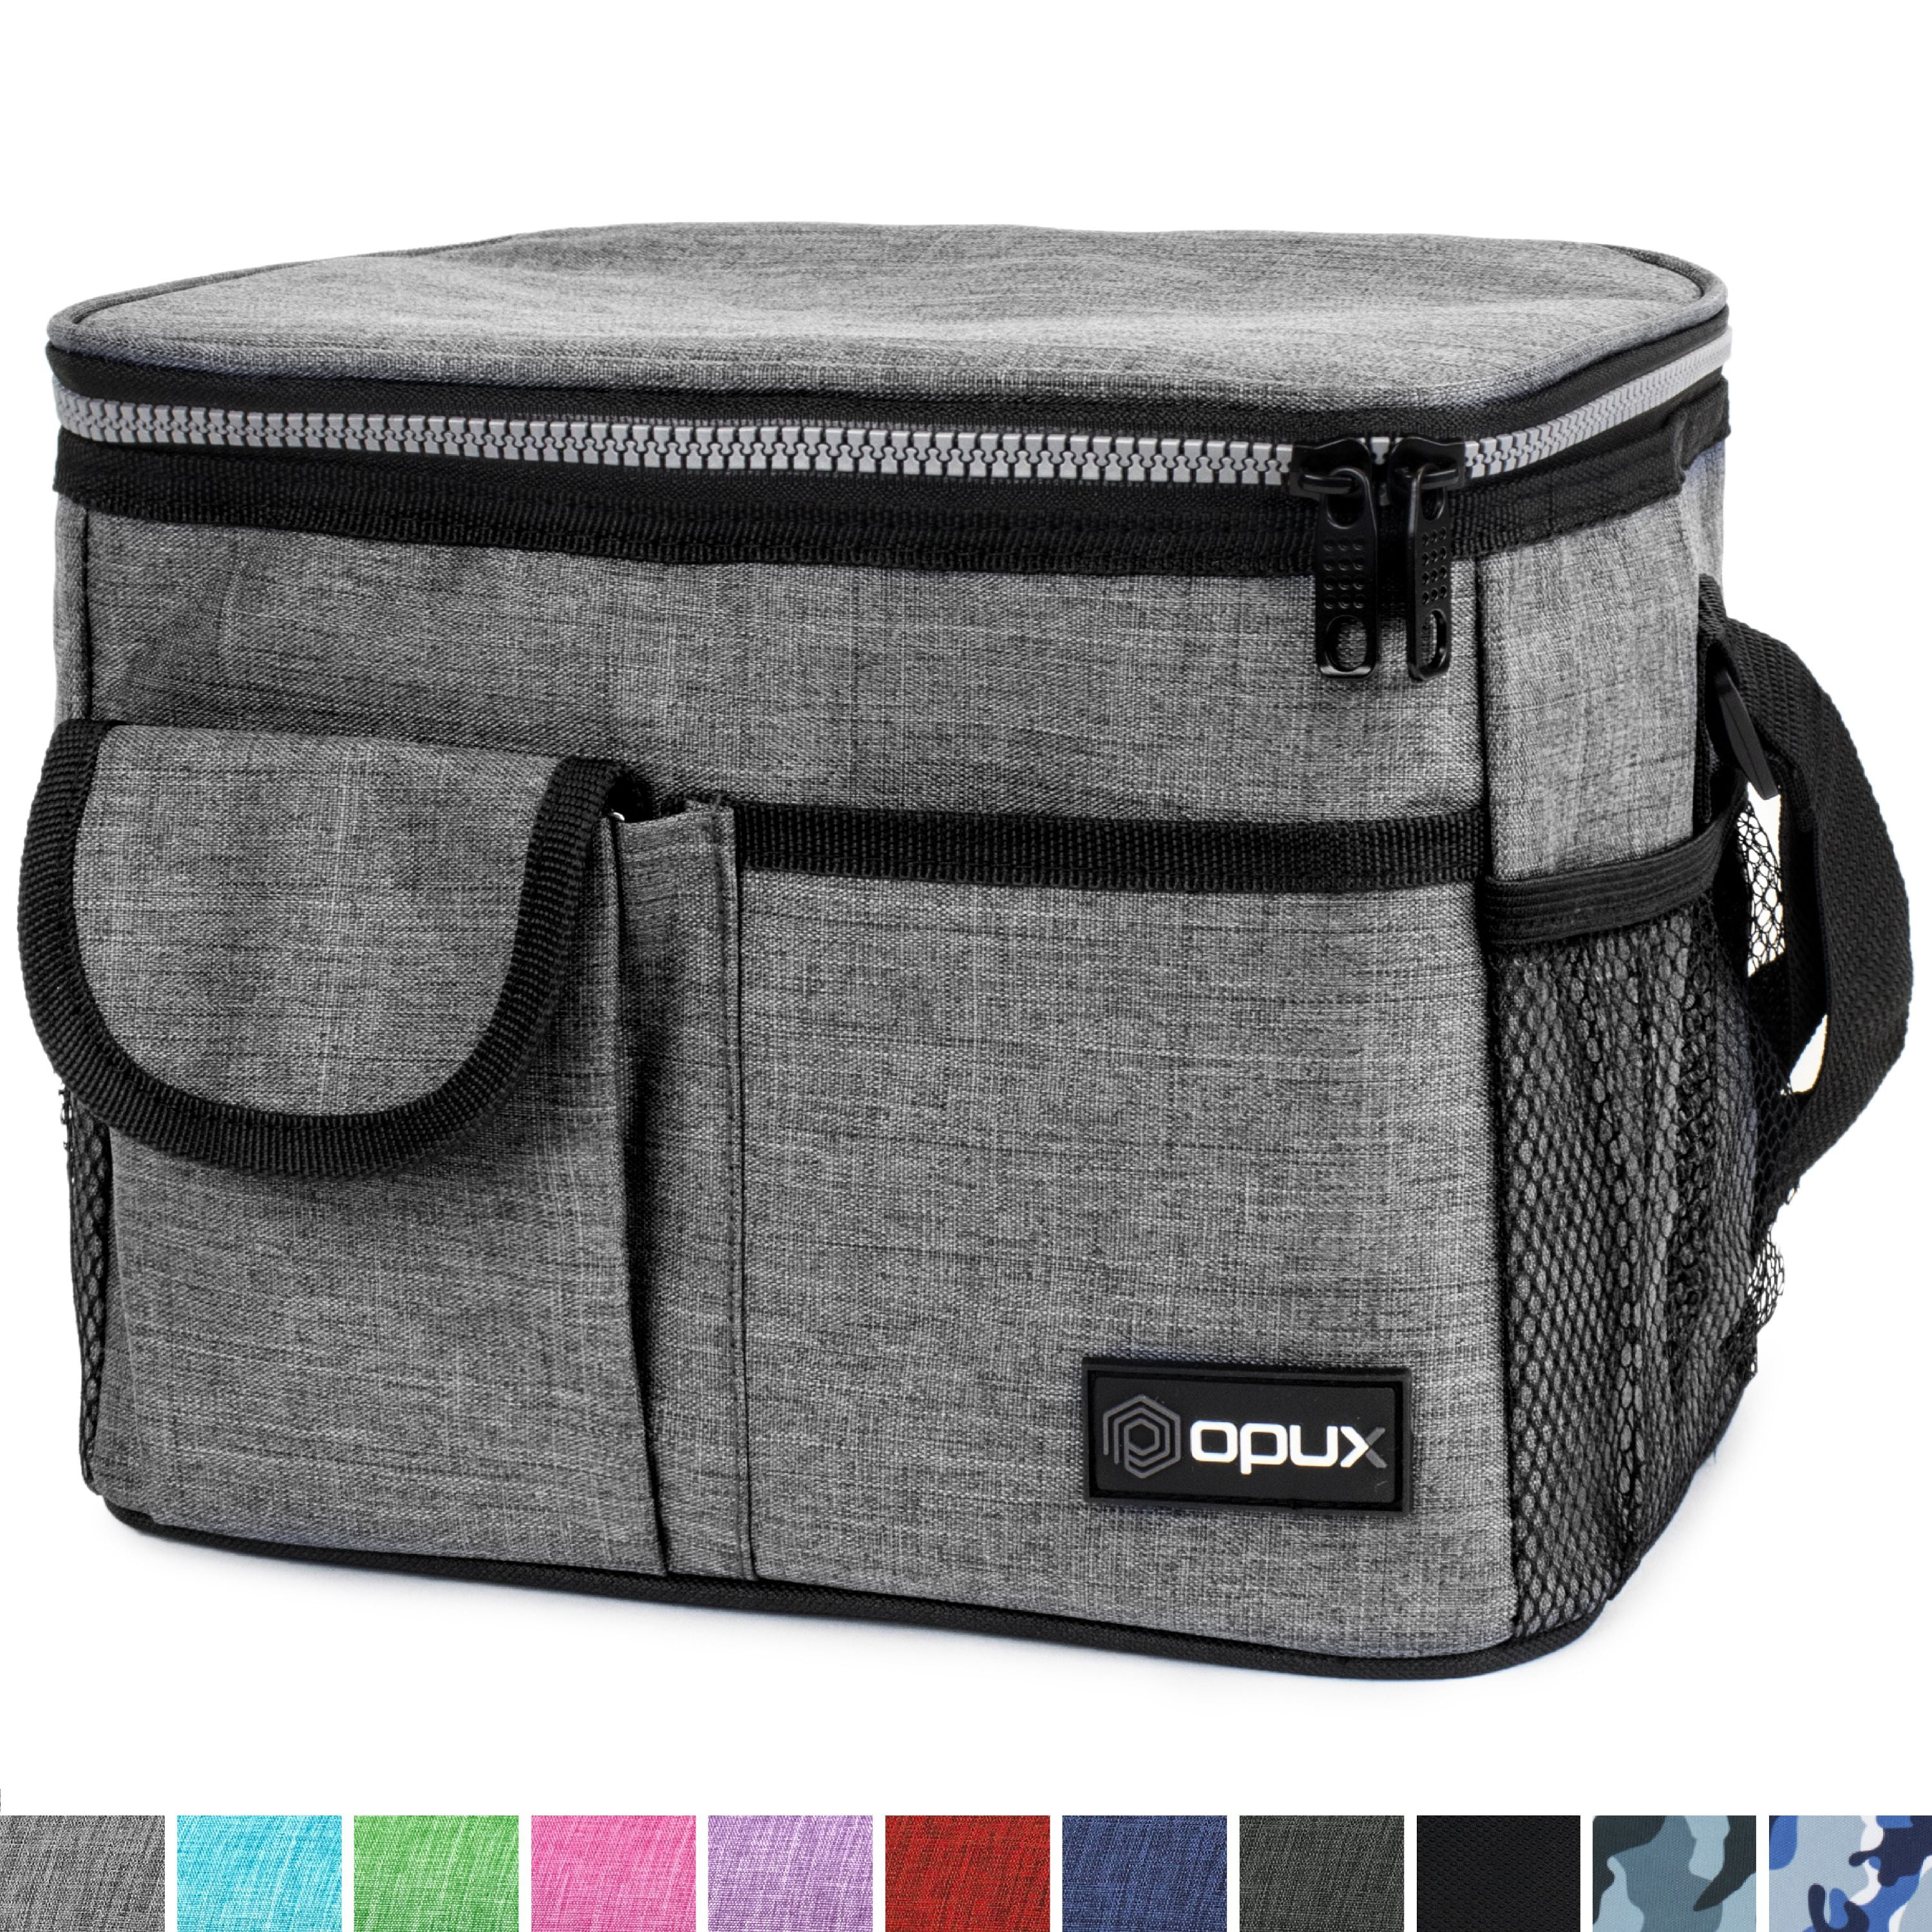 Big Large Insulated Lunch Cooler Box Bag 2 Compartments Strap Pockets Straps